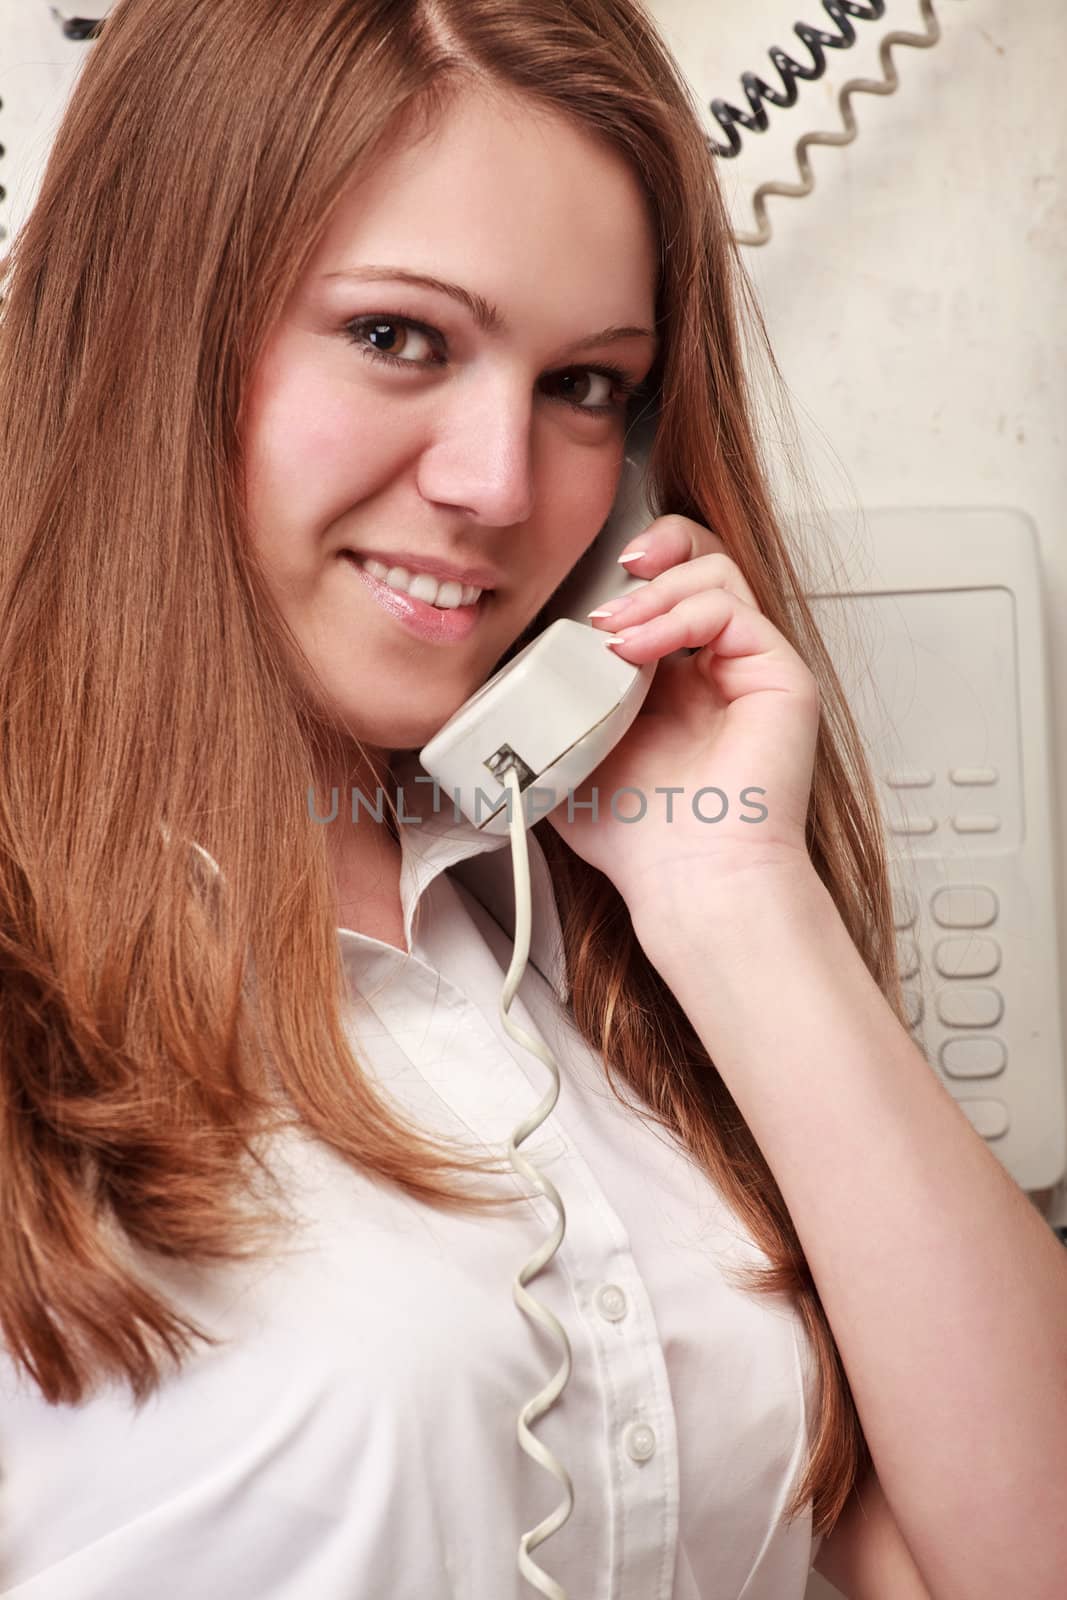  young woman talking on phone